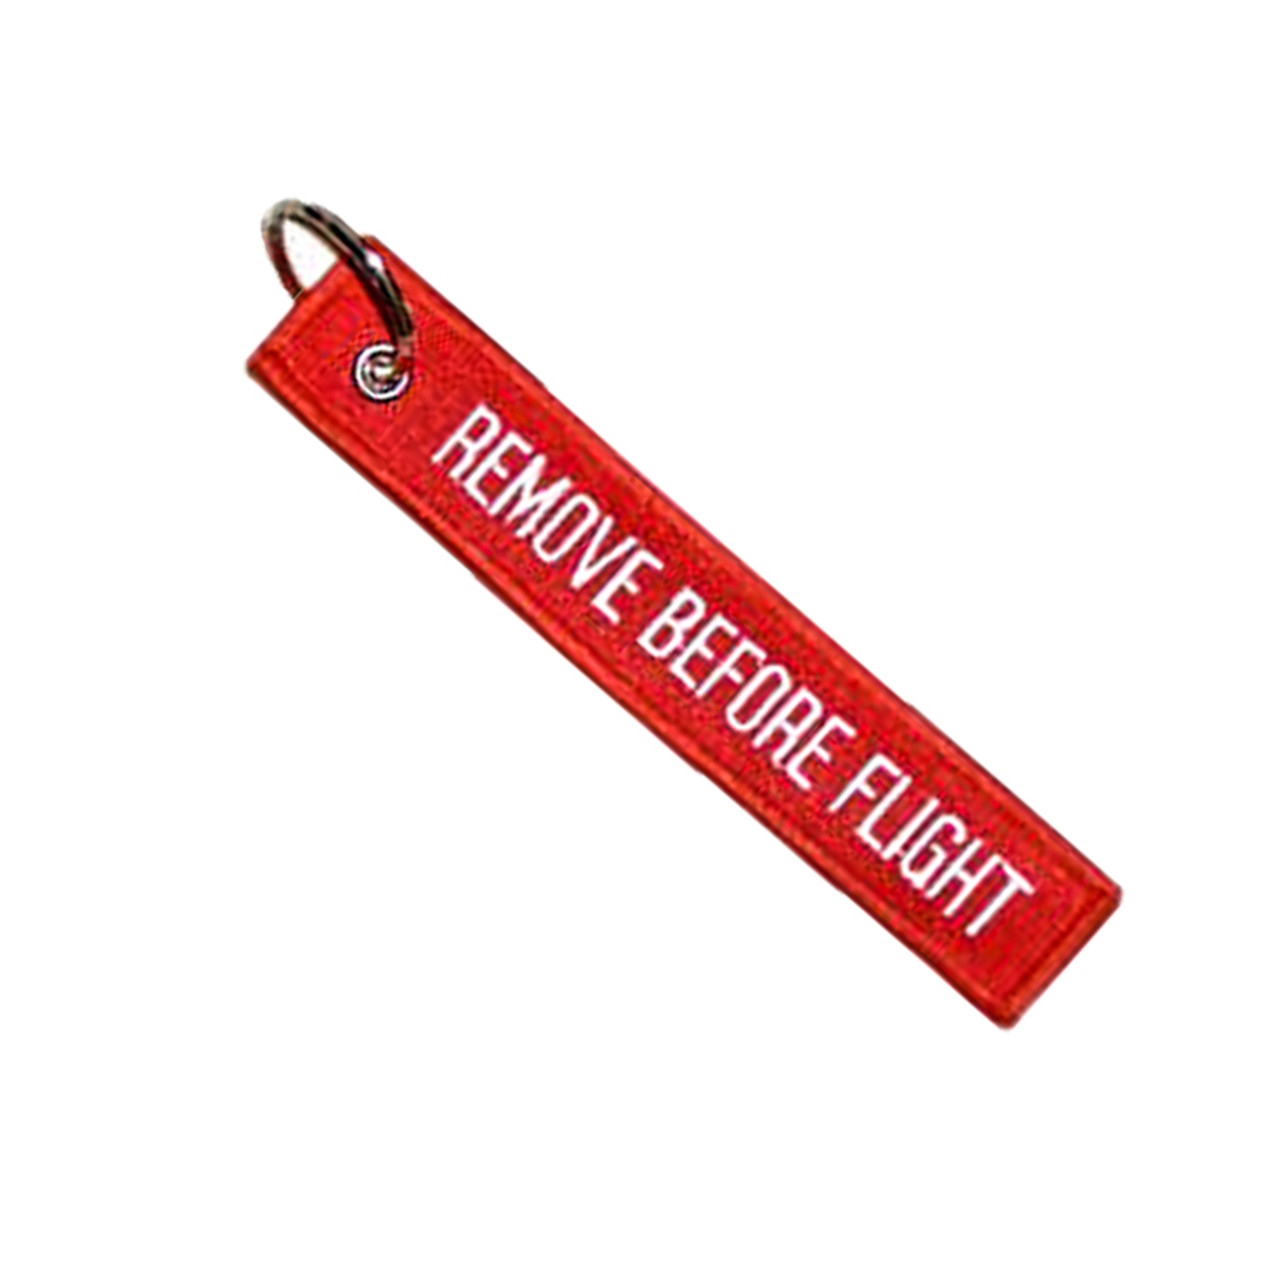 REMOVE BEFORE FLIGHT KEYCHAIN RED/white QTY= 1 TAG FLAG PILOT CREW KEY 